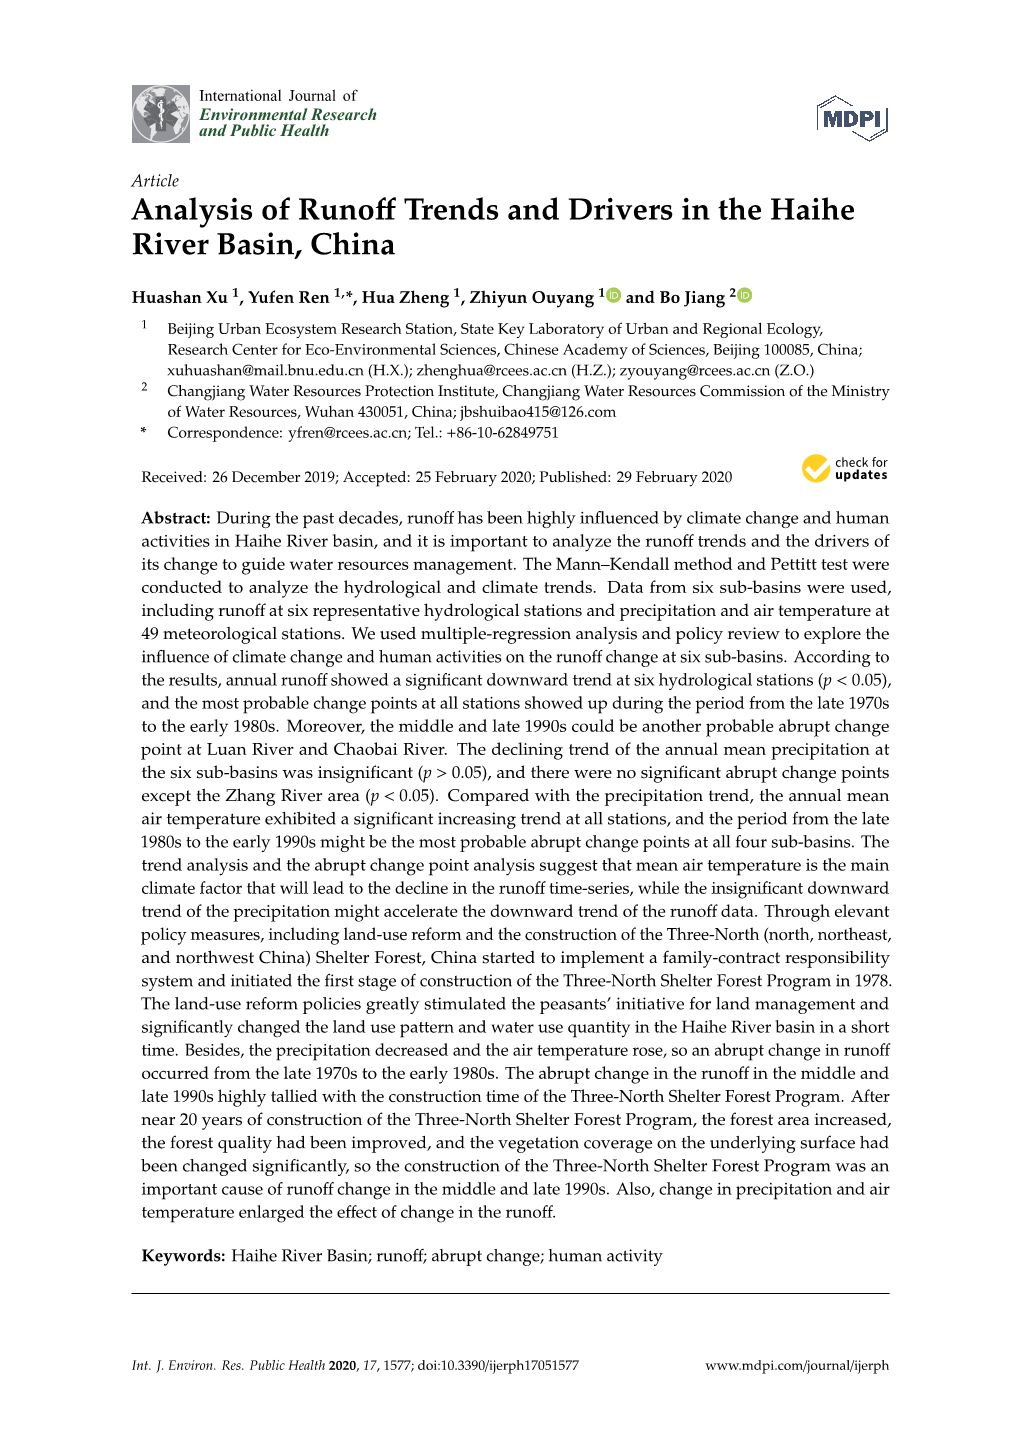 Analysis of Runoff Trends and Drivers in the Haihe River Basin, China